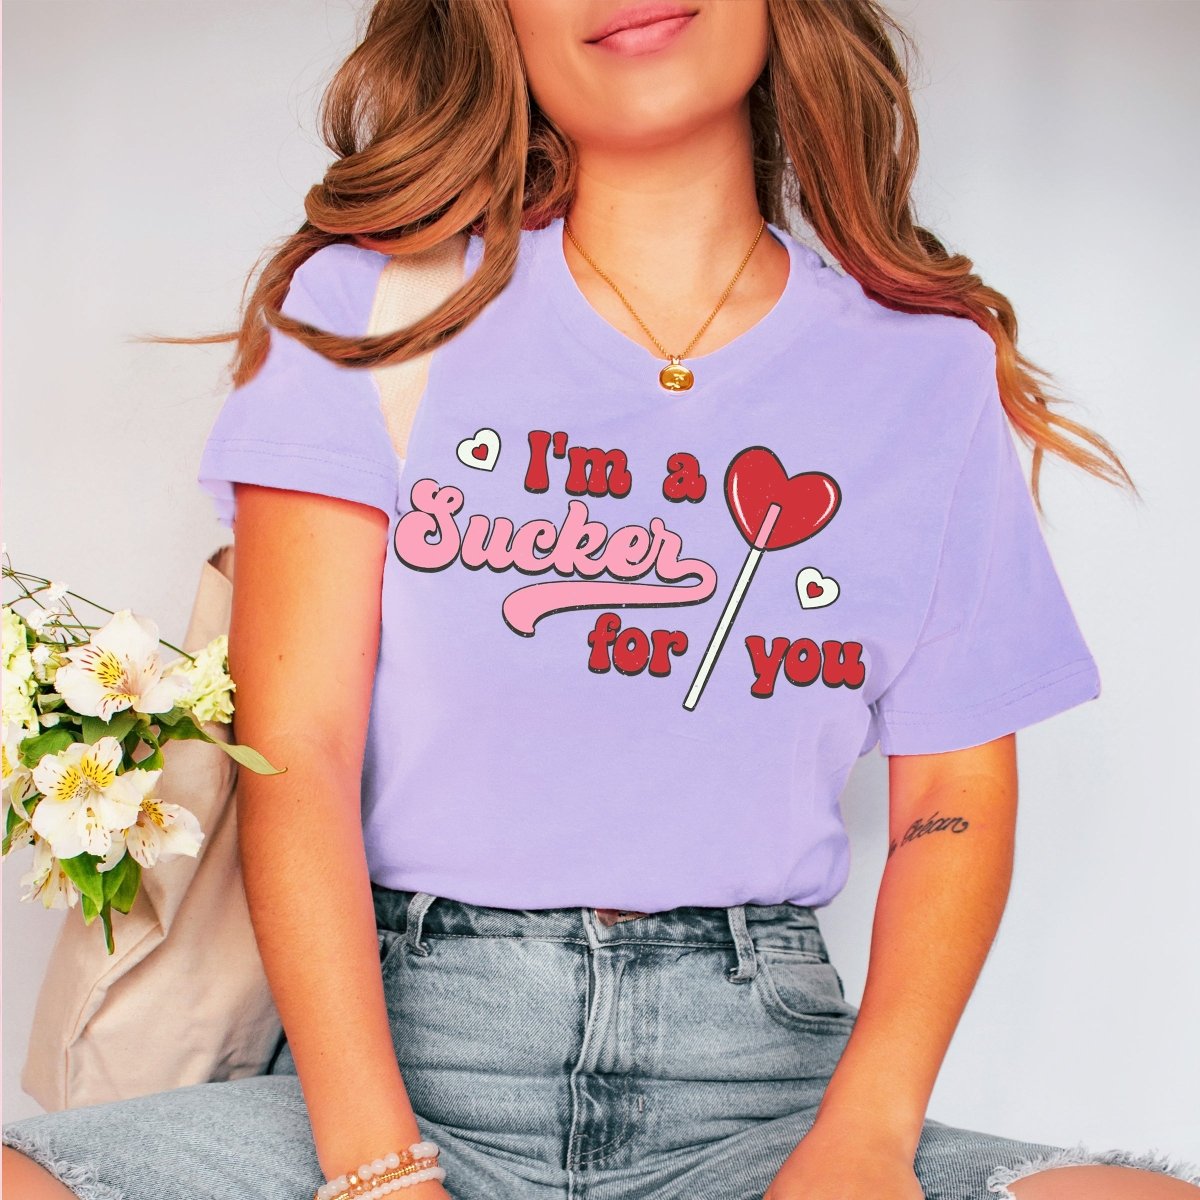 I'm a Sucker For You Wholesale Tee - Limeberry Designs